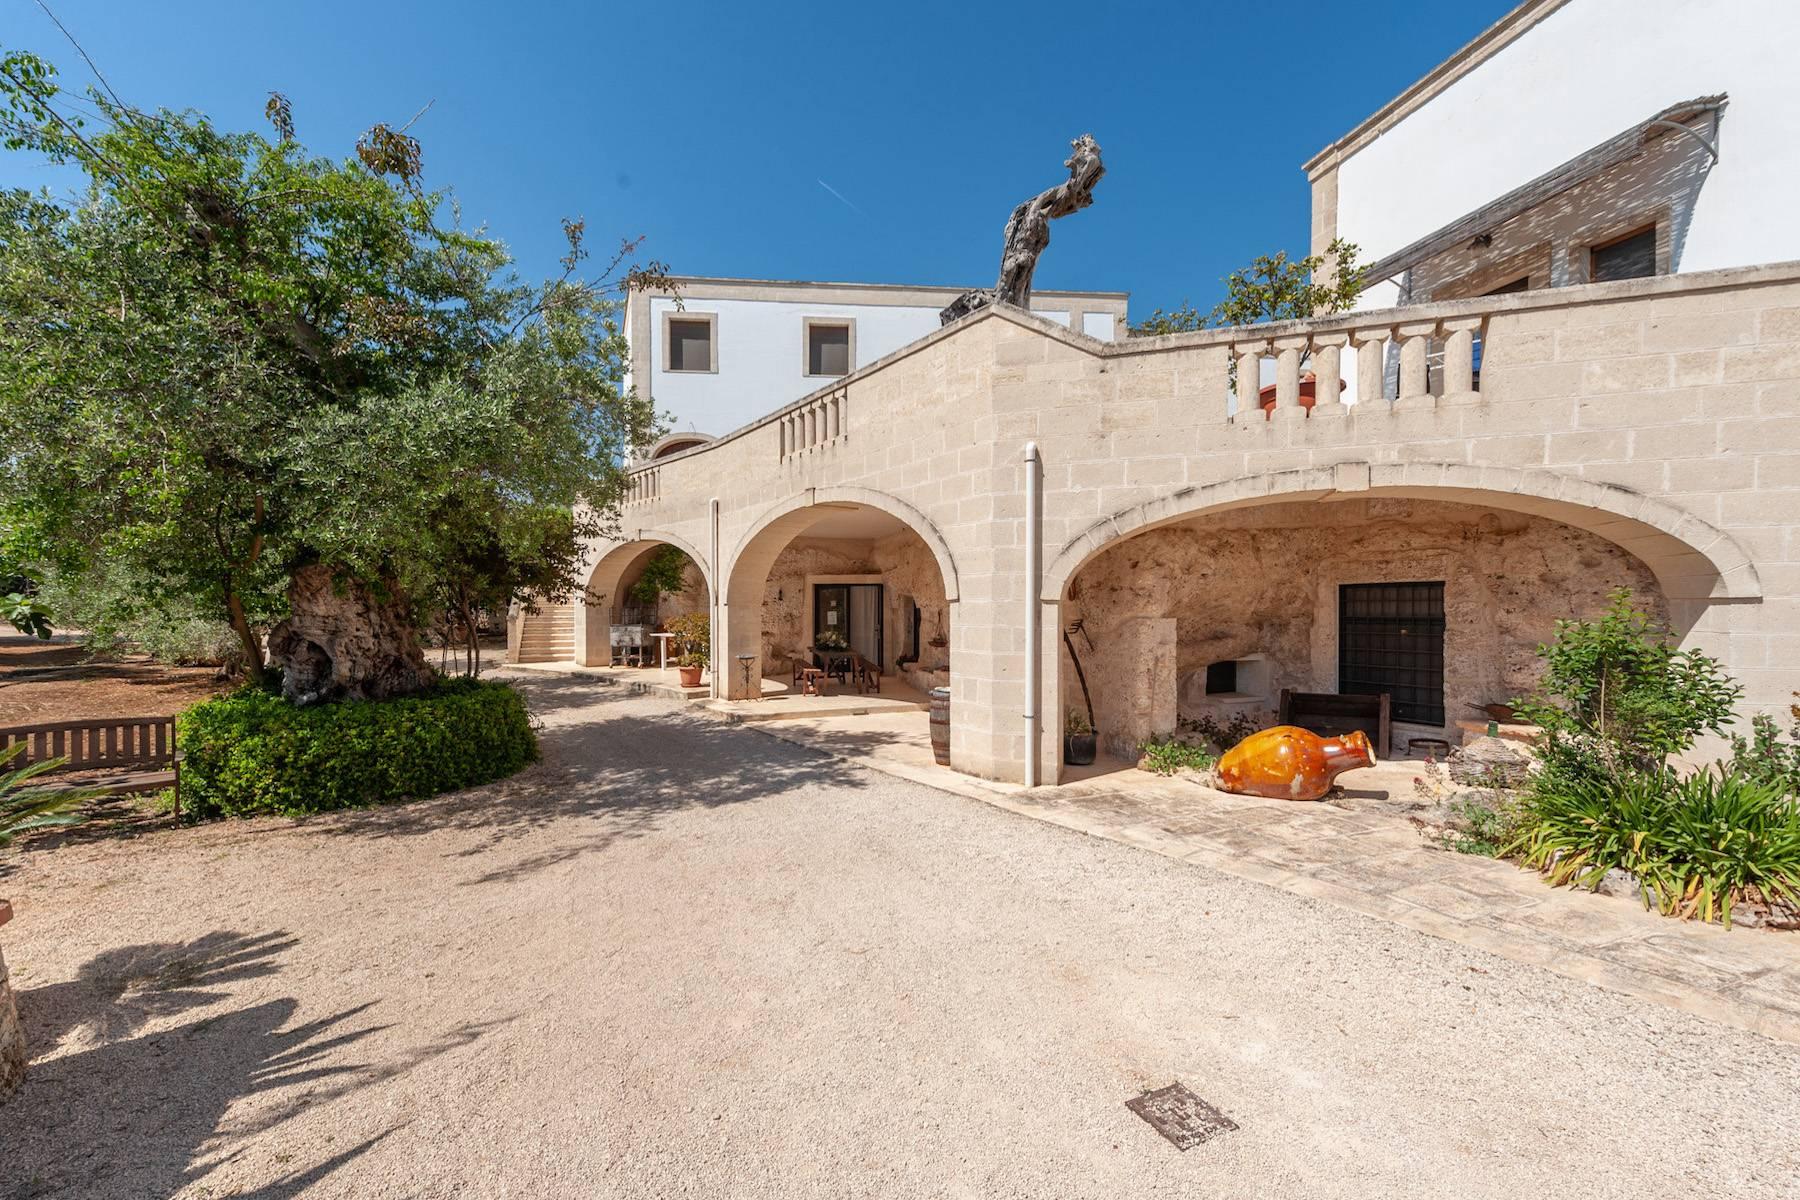 Charming 18th century Masseria surrounded by centuries-old olive trees - 26